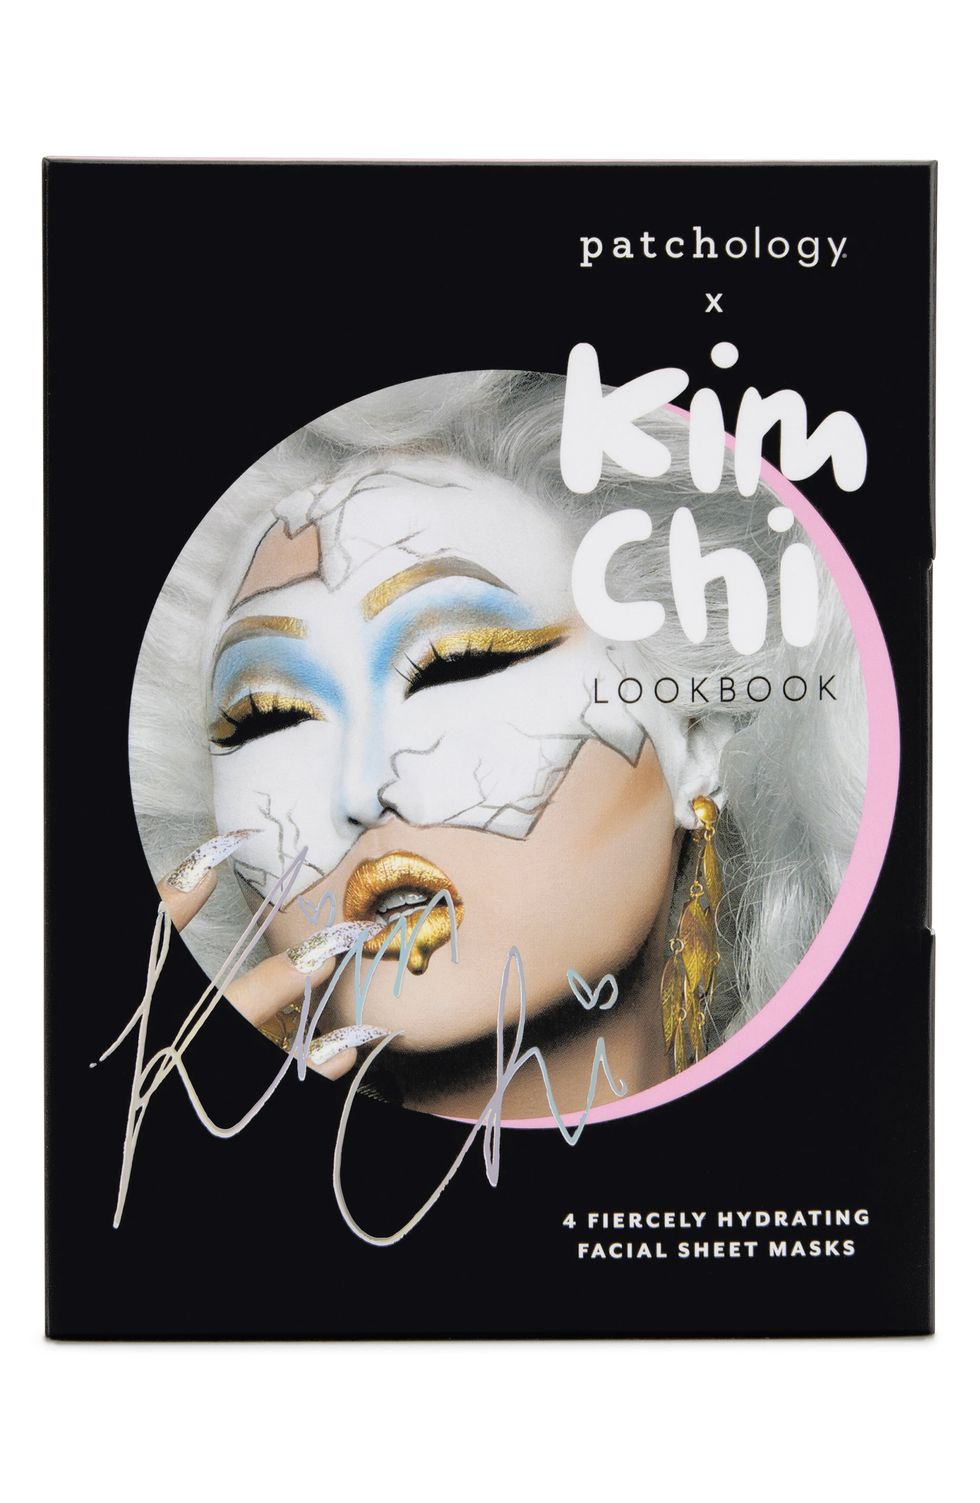 Patchology x Kim Chi Fiercely Hydrating Face Mask Look Book